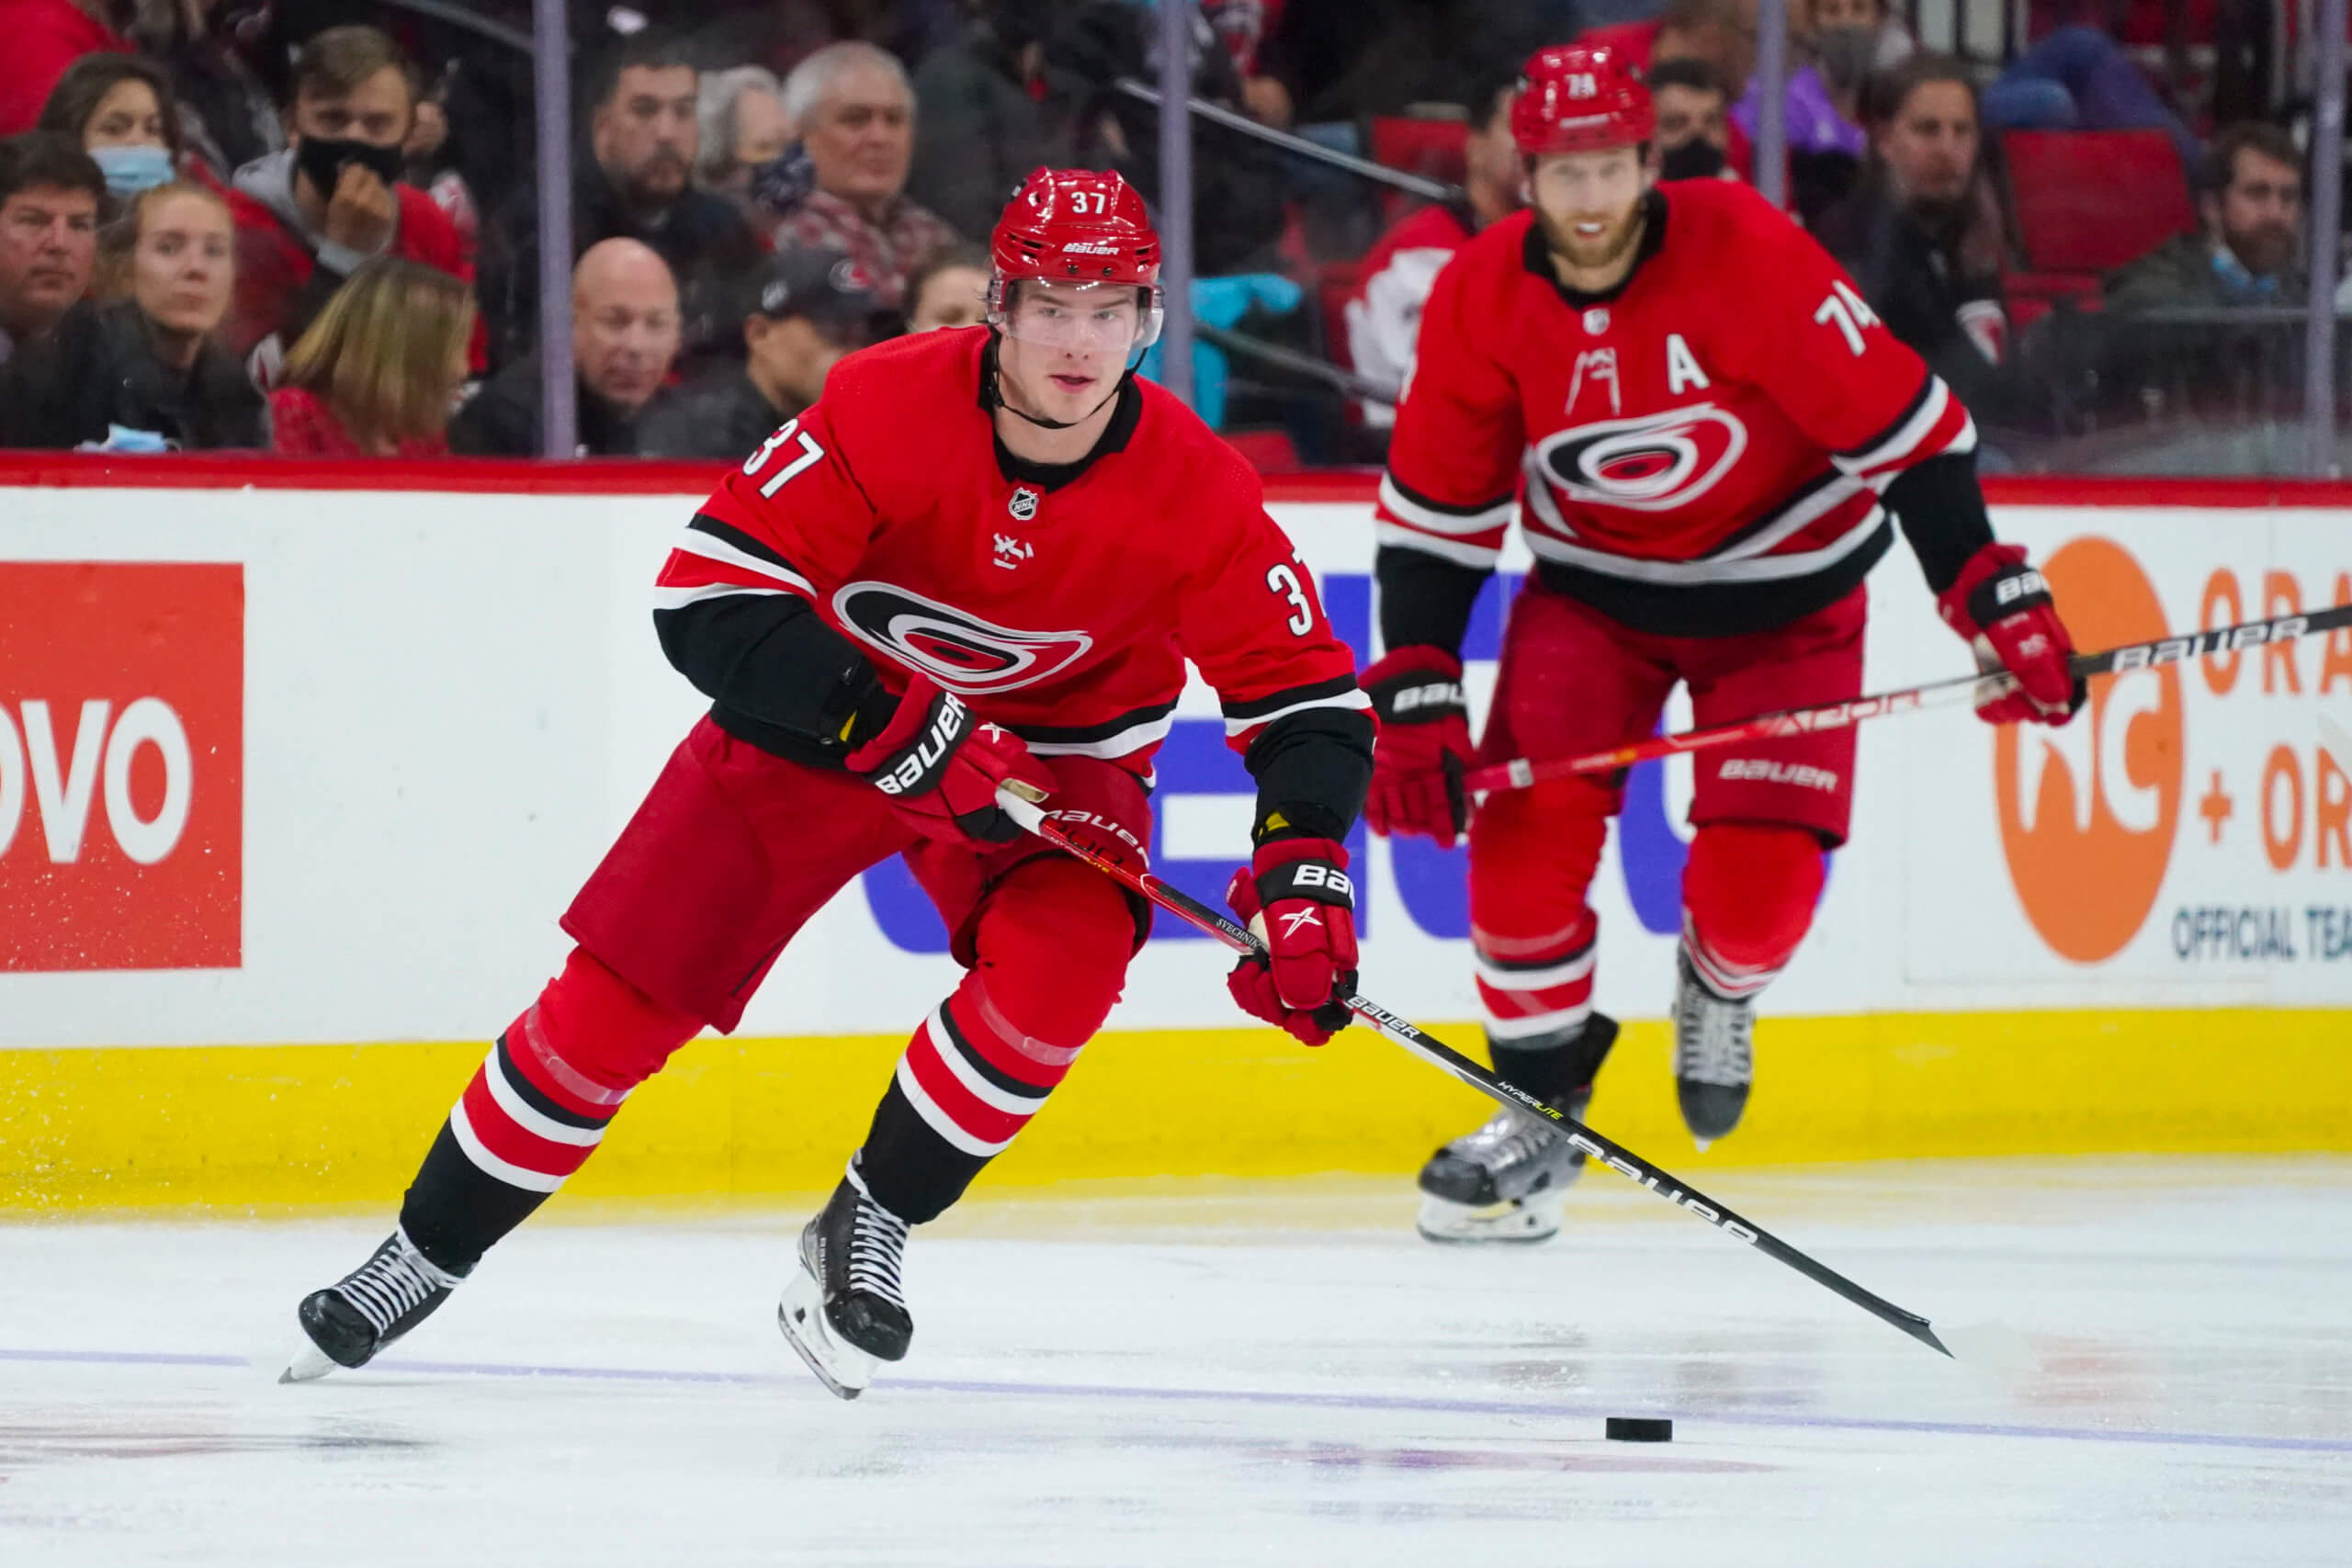 2022 Stanley Cup Playoff Preview: Hurricanes vs. Bruins